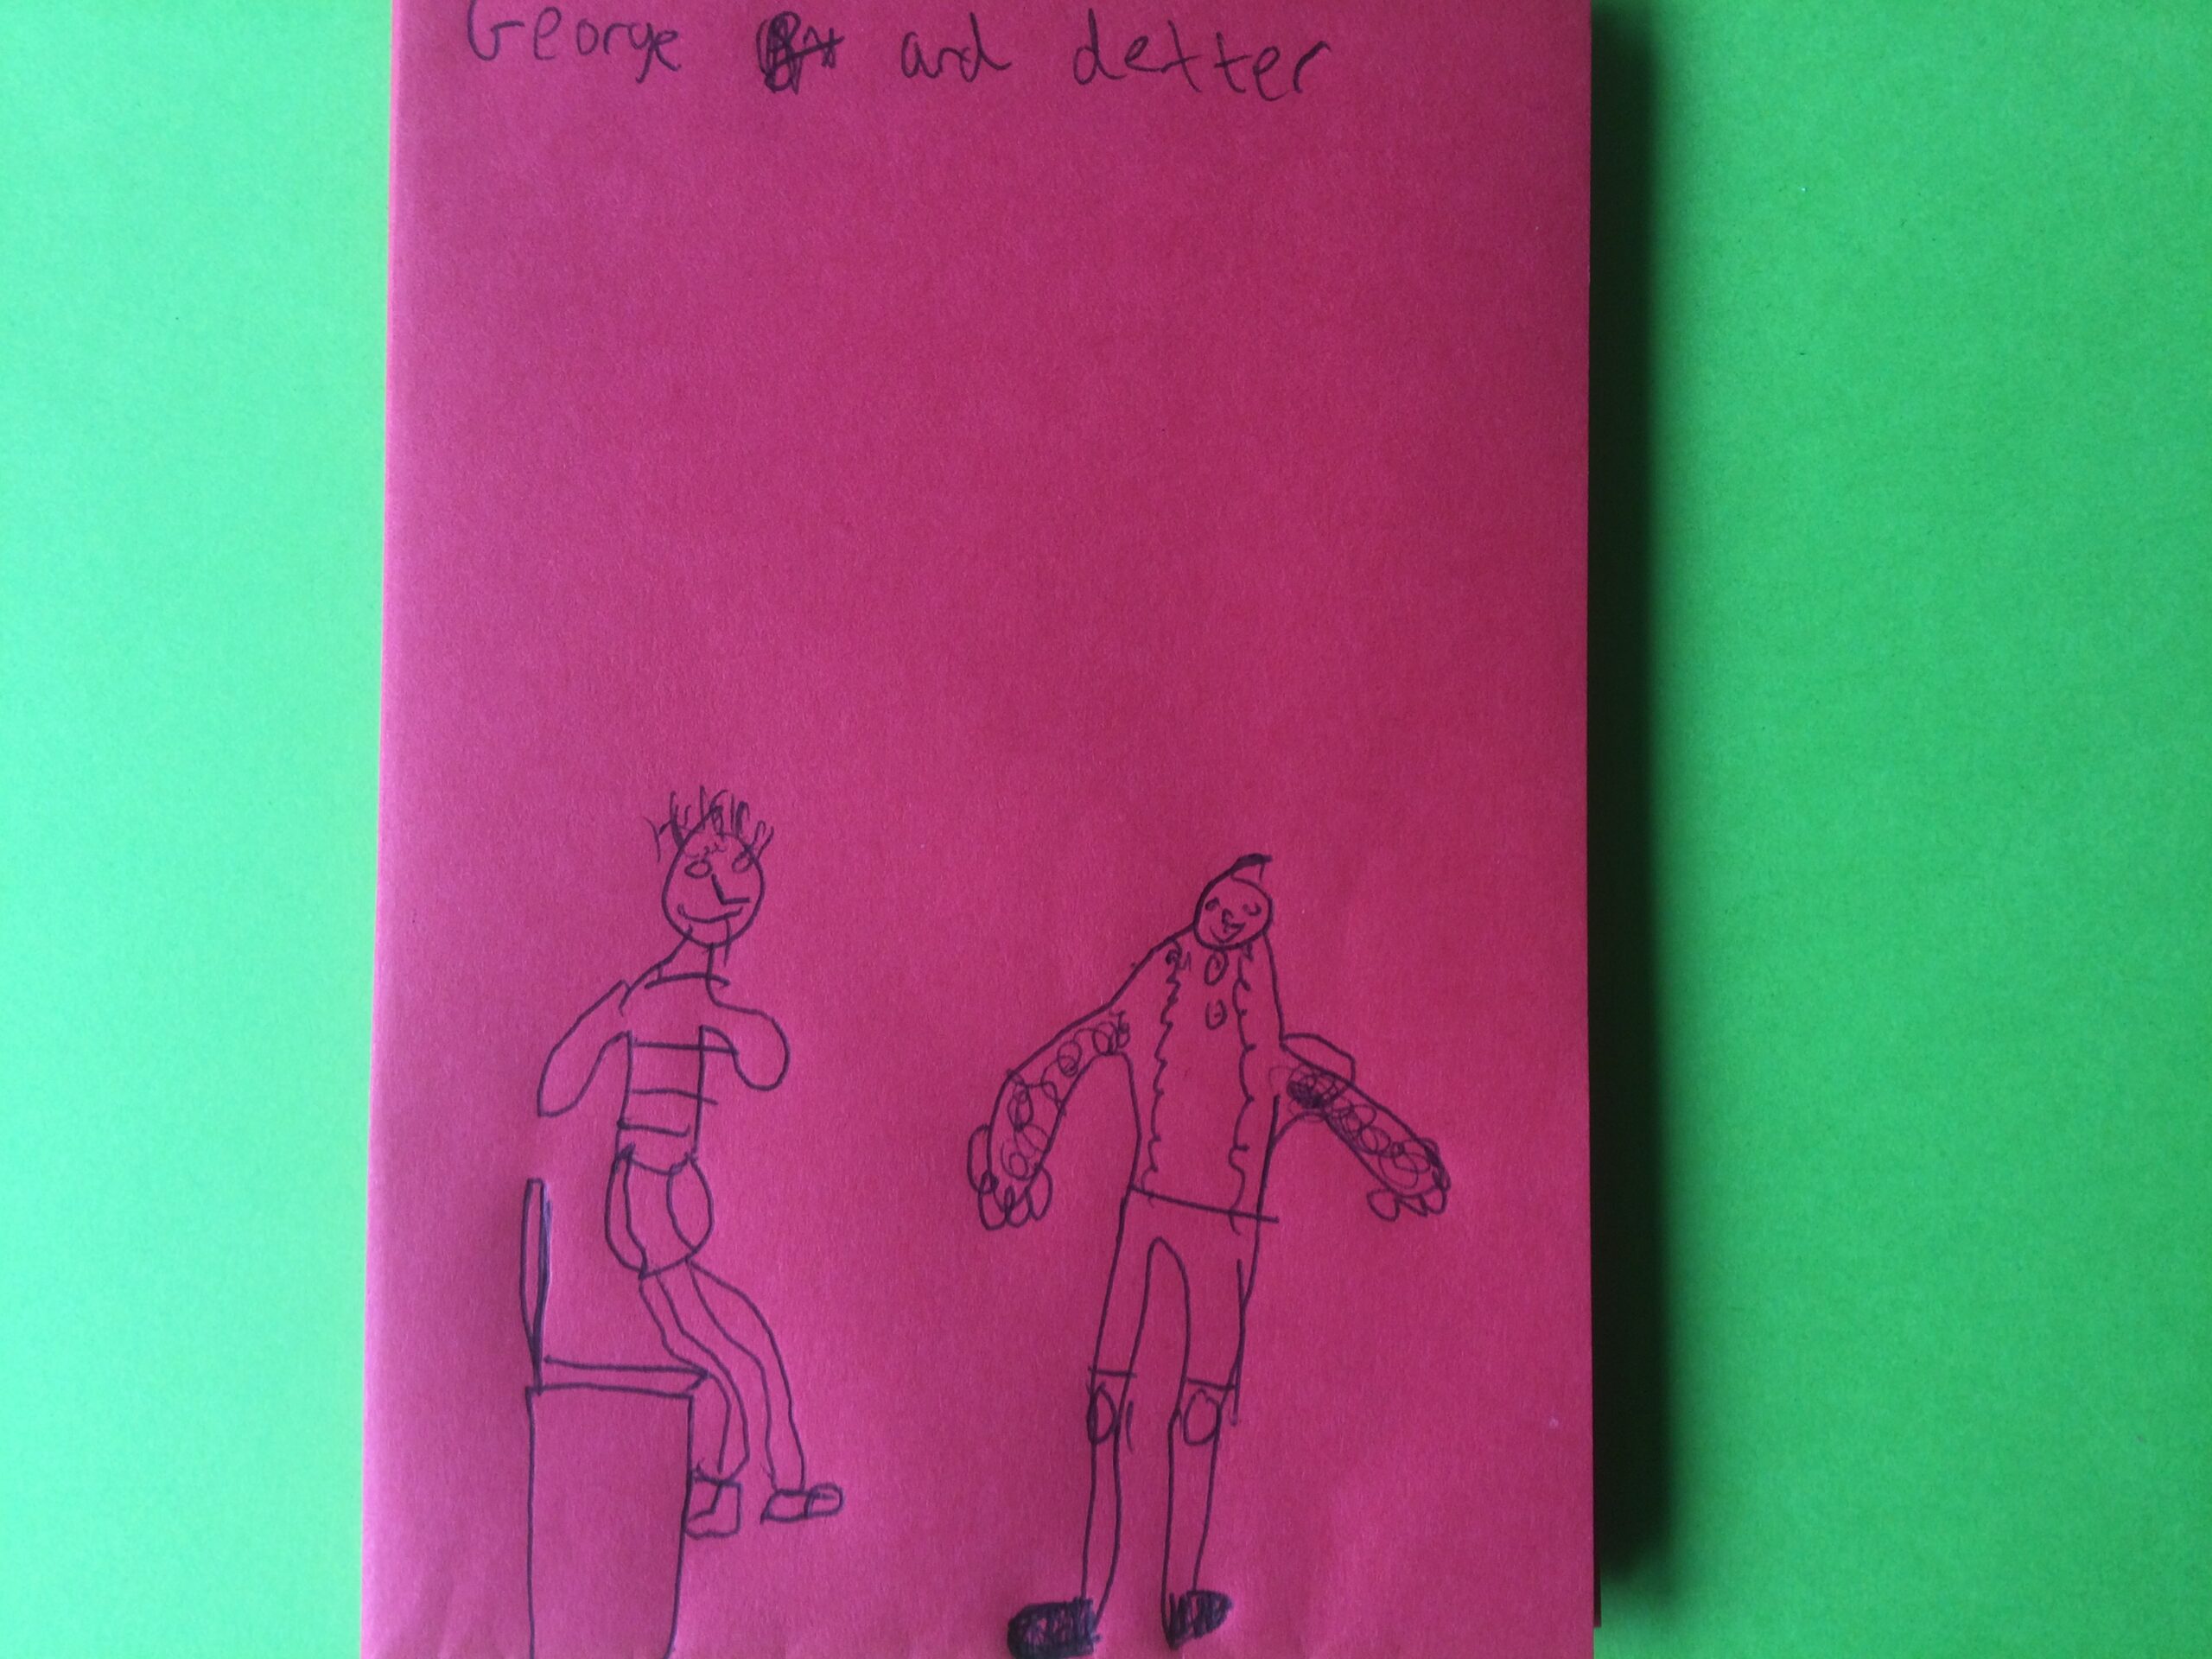 A pink paper booklet with two hand-drawn figures on the cover and the names George and Dexter above